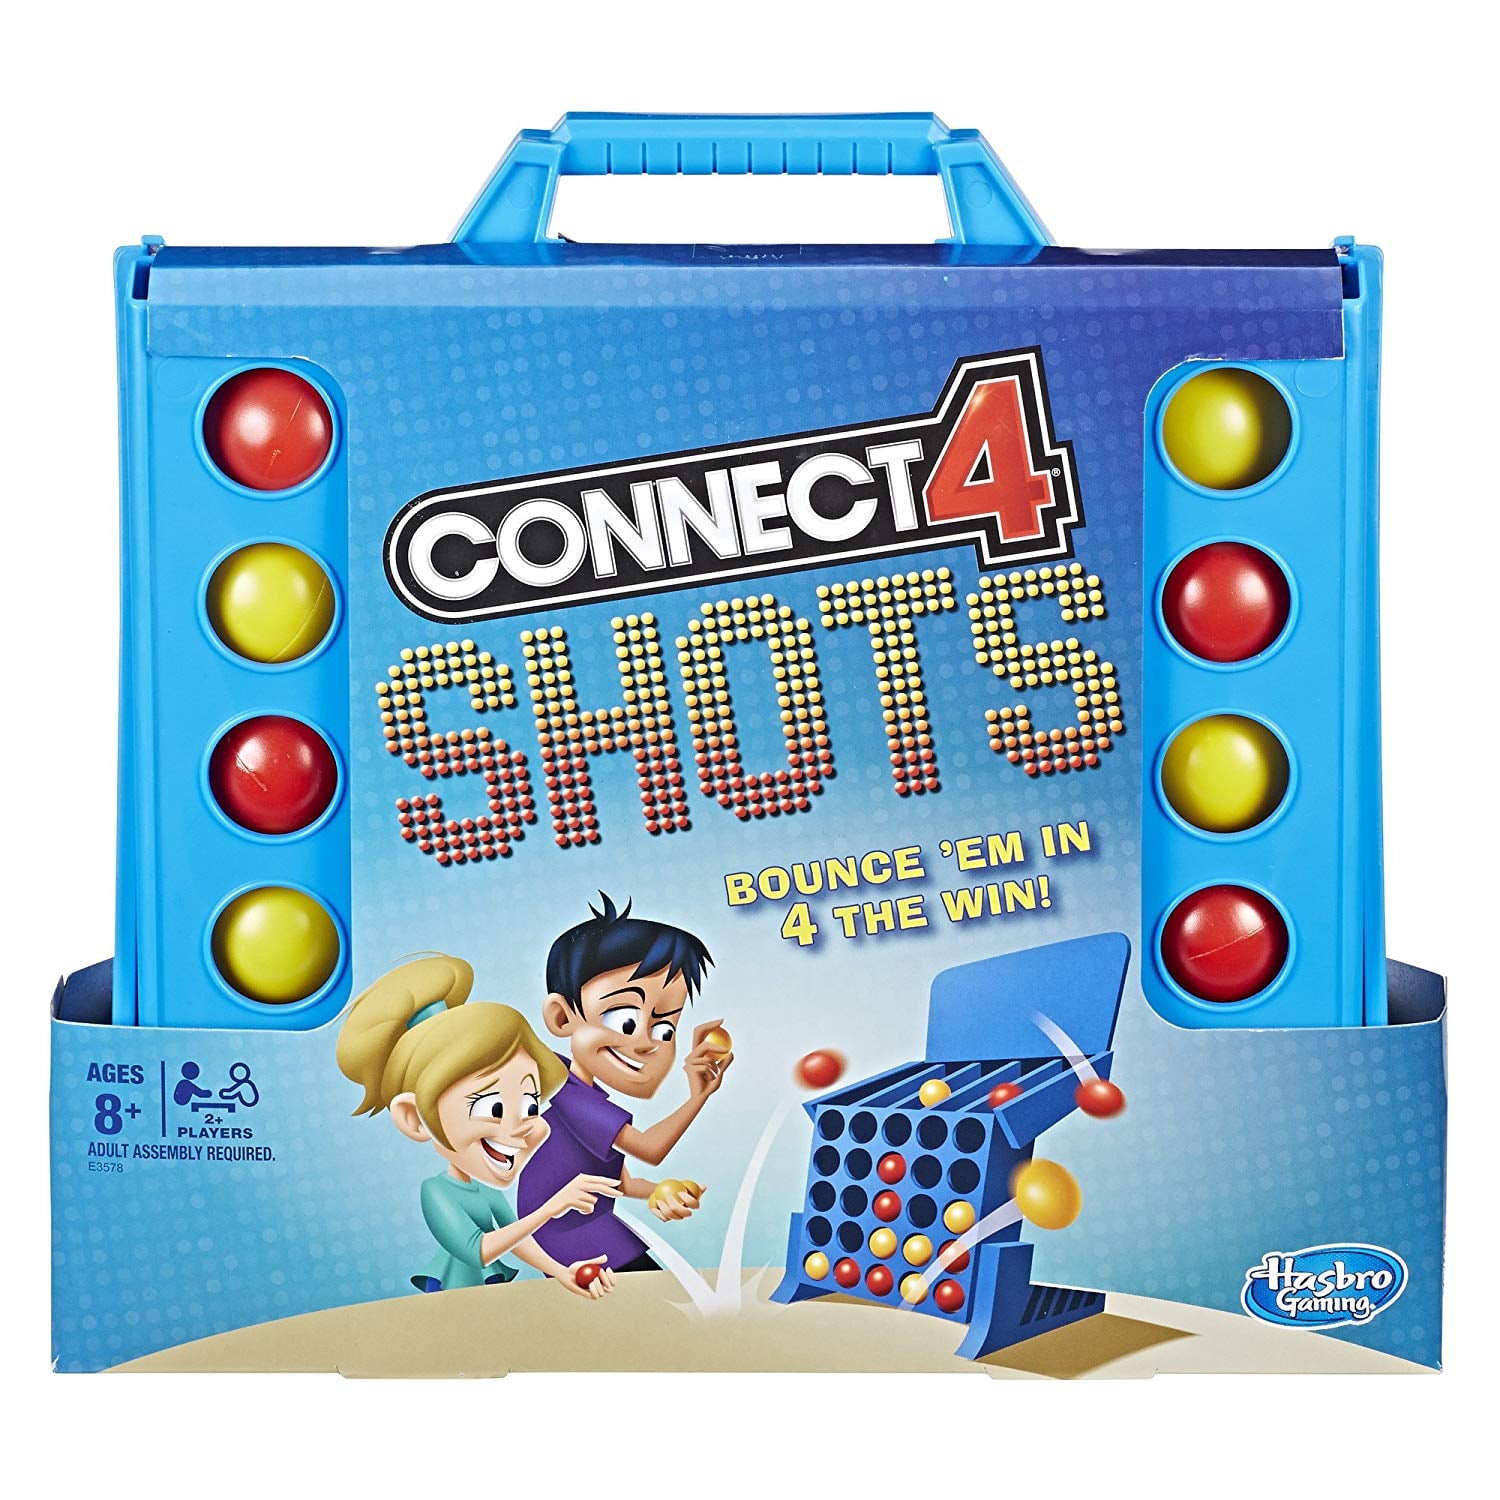 fun educational toys for 7 year olds